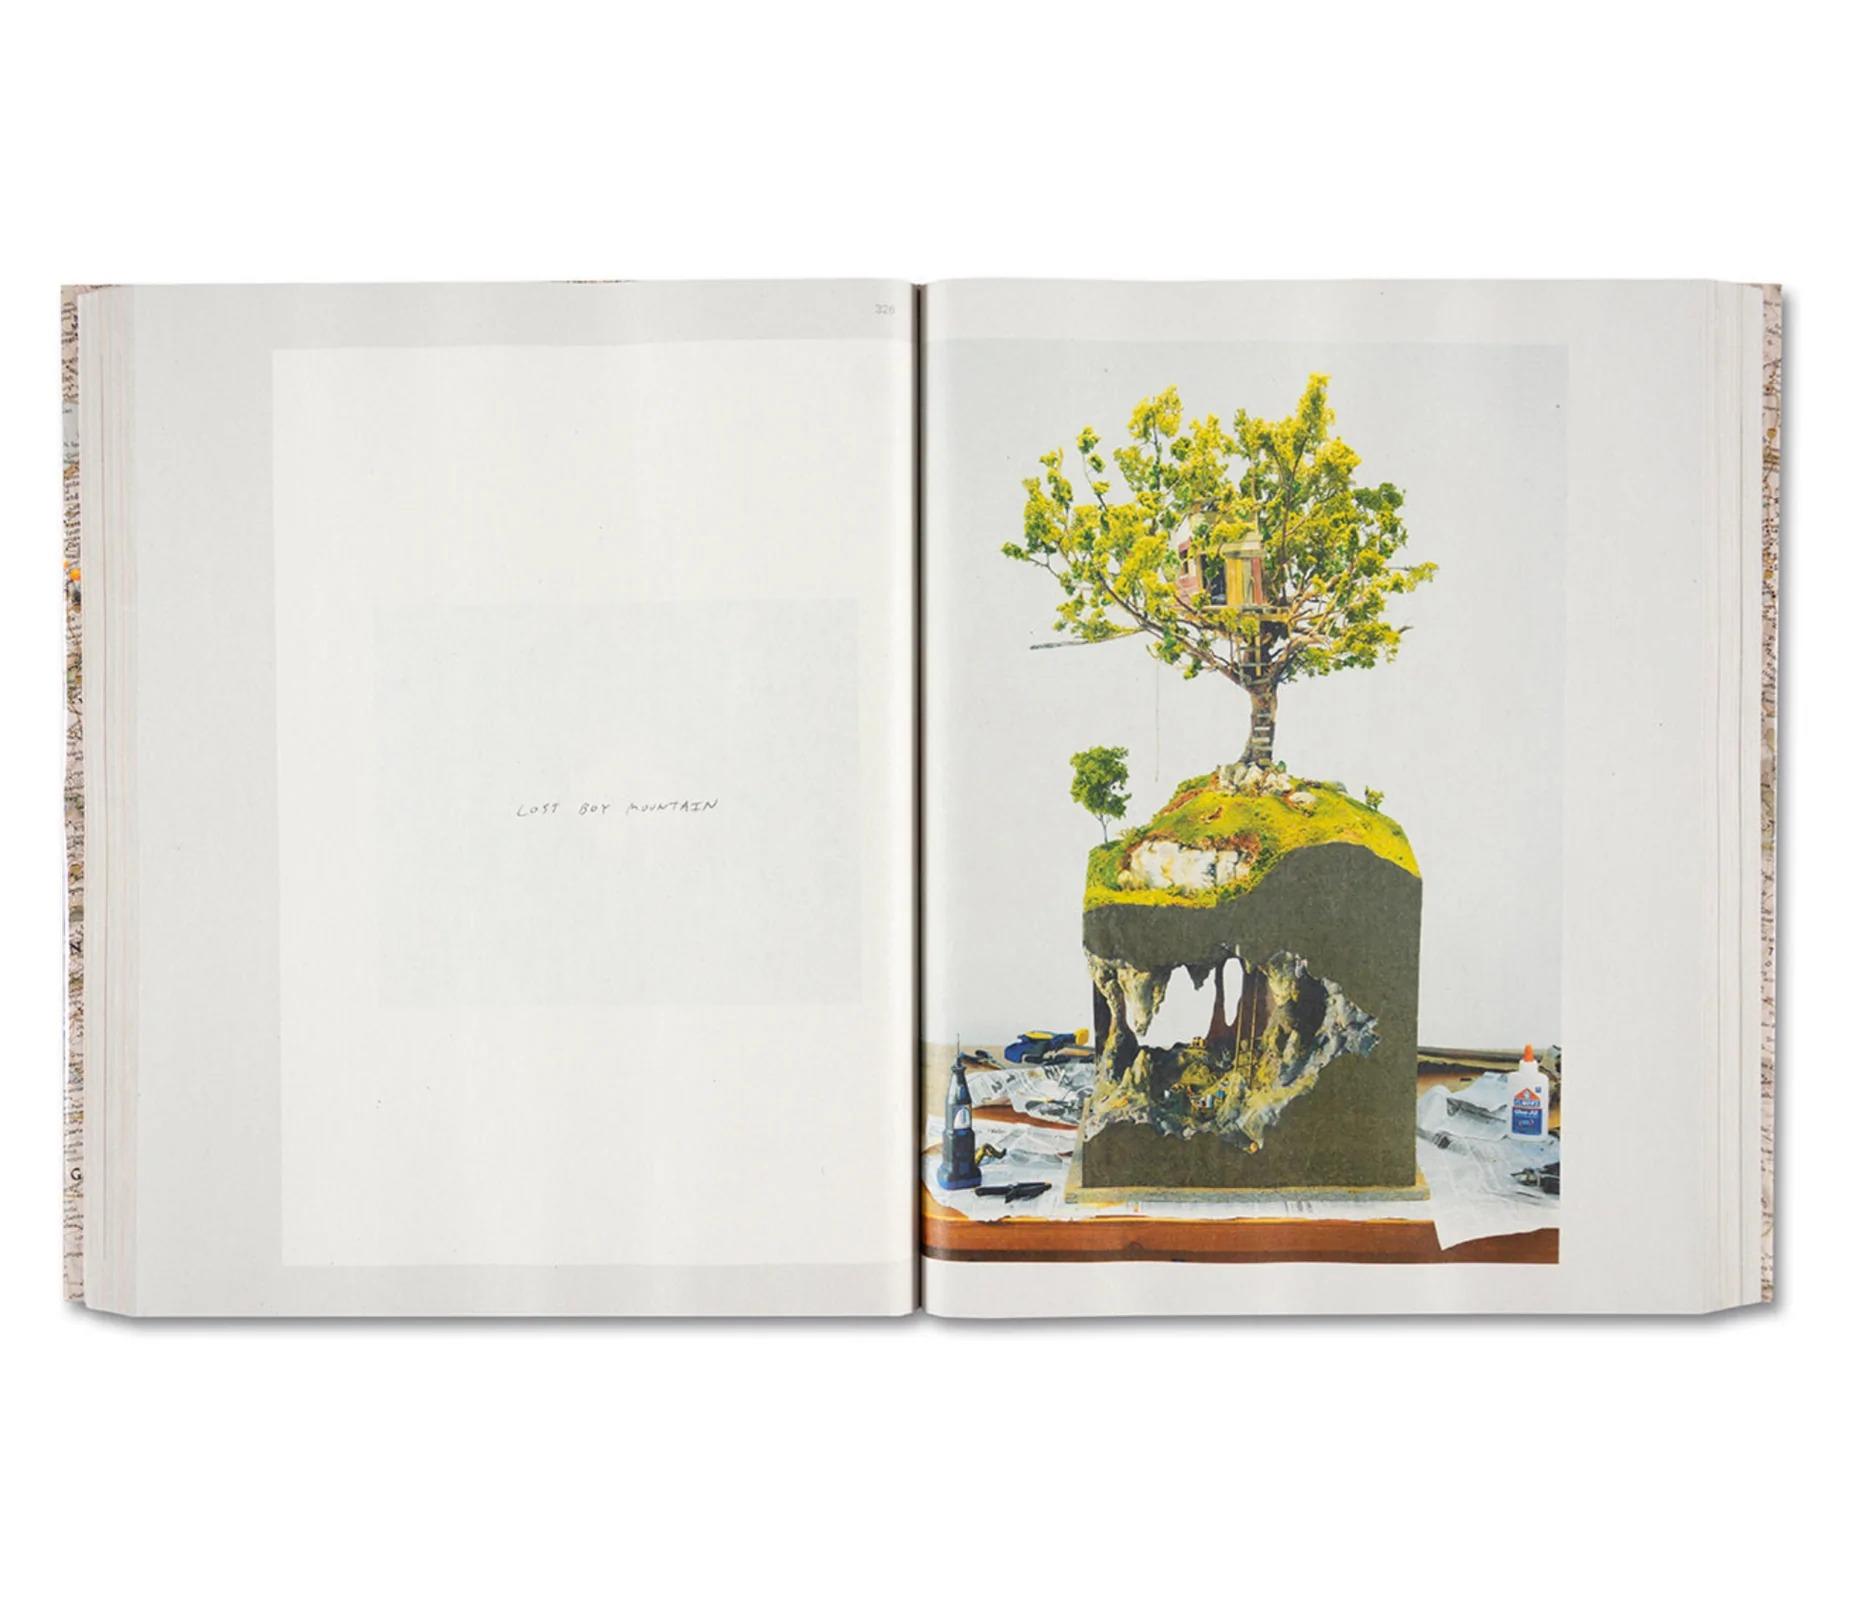 【JAPANESE EDITION / SIGNED/ポスター特典付き】GATHERED LEAVES ANNOTATED by Alec Soth アレック・ソス 作品集